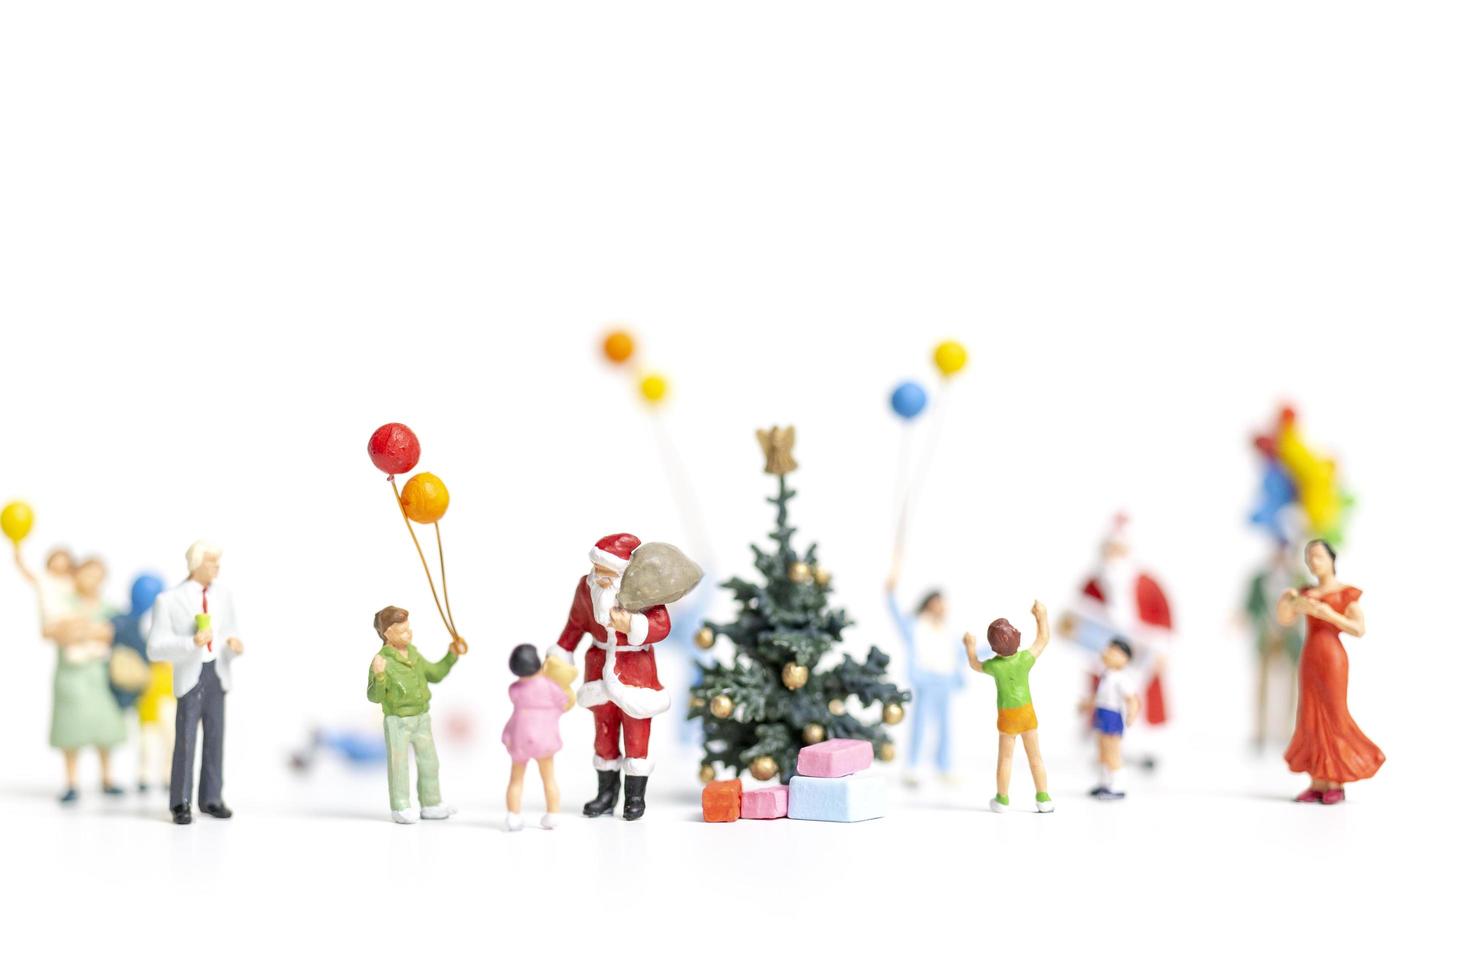 Miniature Santa Claus holding gifts for a happy family, Christmas and Happy New Year concept photo